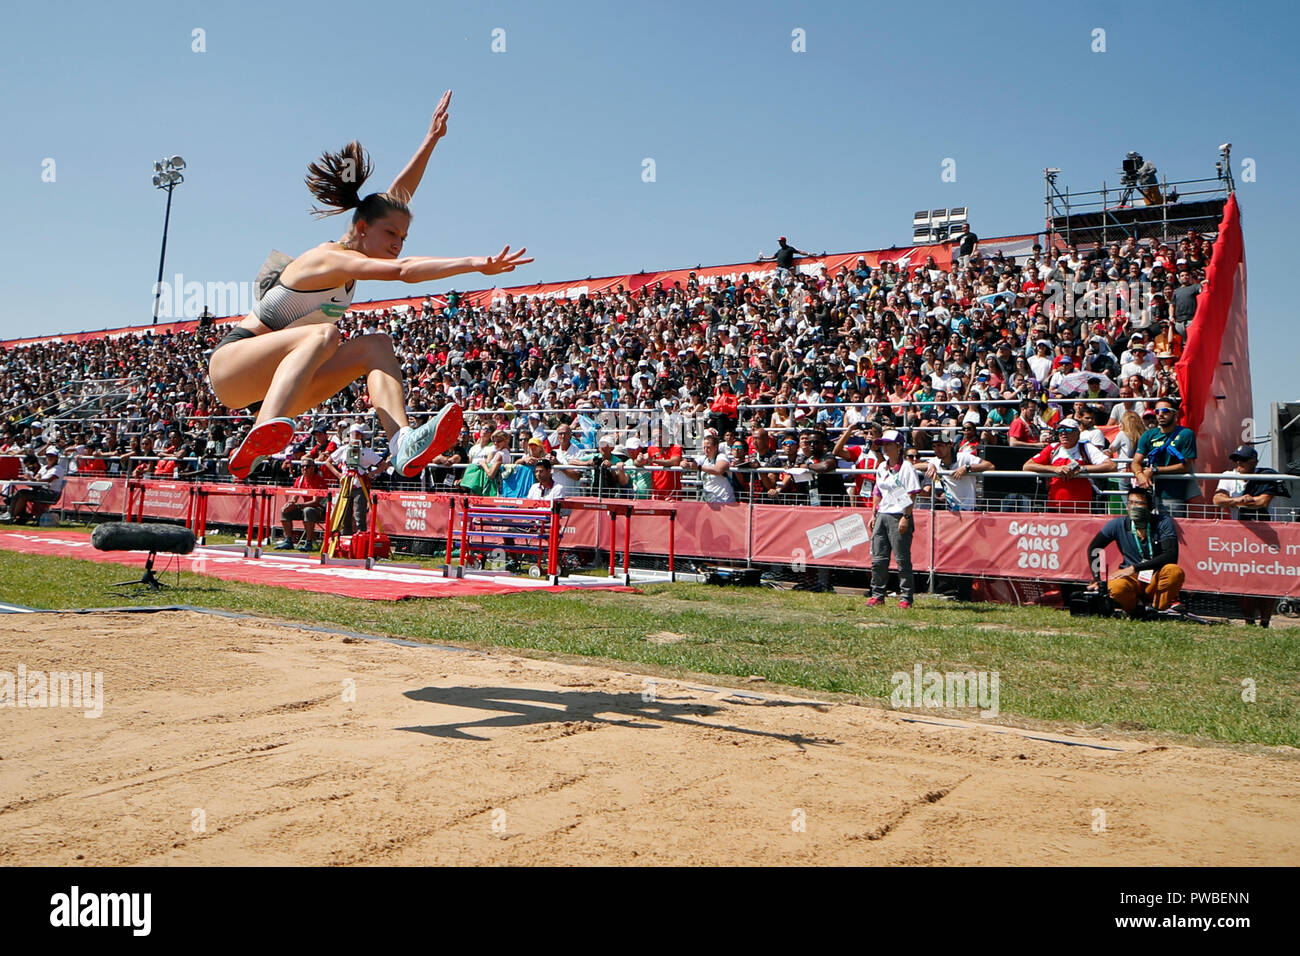 Buenos Aires, Argentina. 14th Oct, 2018. Saskia Woidy from Germany jumps in the long jump at the Olympic Youth Games. Credit: Gustavo Ortiz/dpa/Alamy Live News Stock Photo